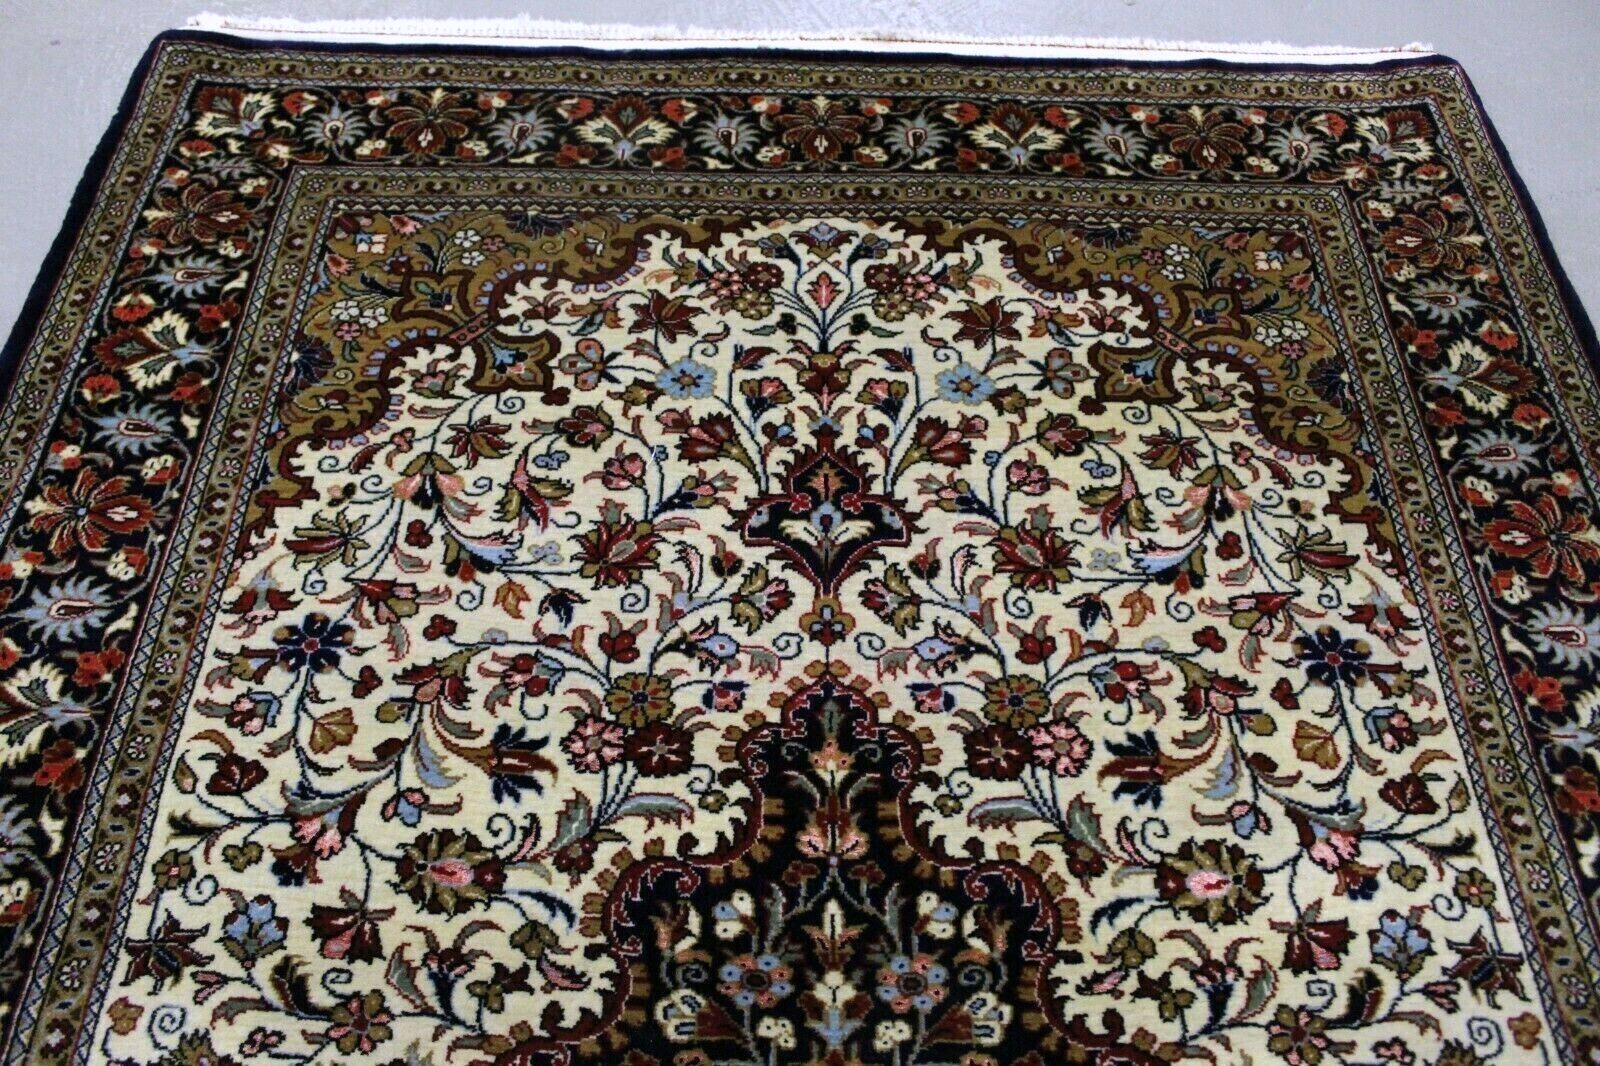 Intricate Central Medallion with Floral Motifs and Geometric Patterns on Qum Rug - 1970s